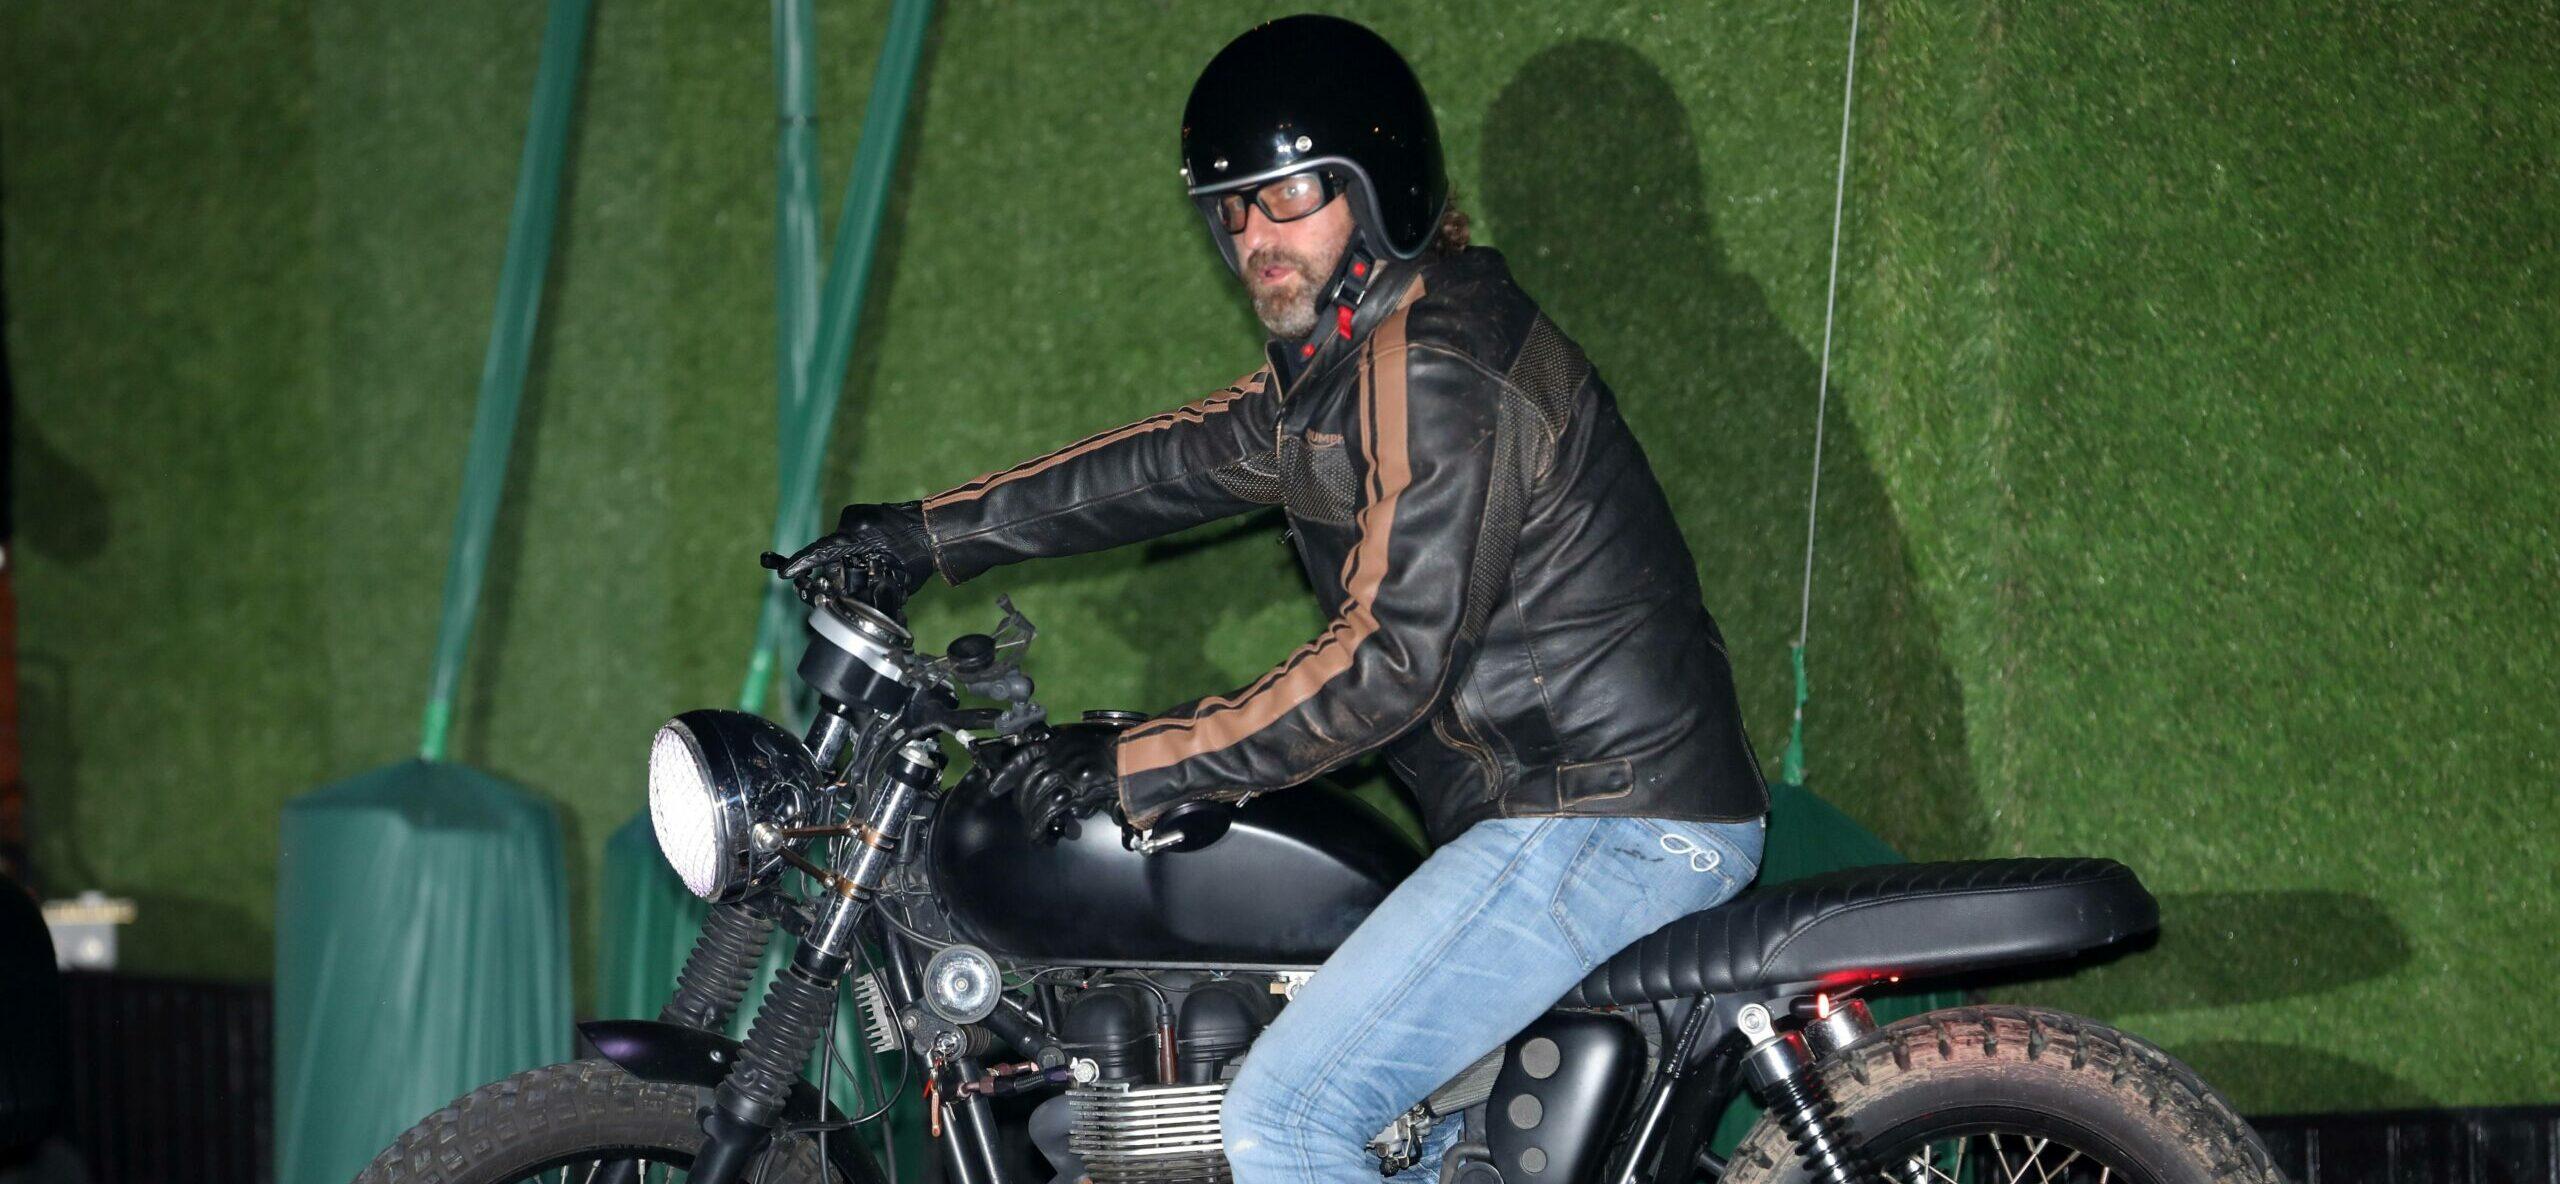 Gerard Butler takes off on his motorcycle after dining at Nobu Malibu with friends